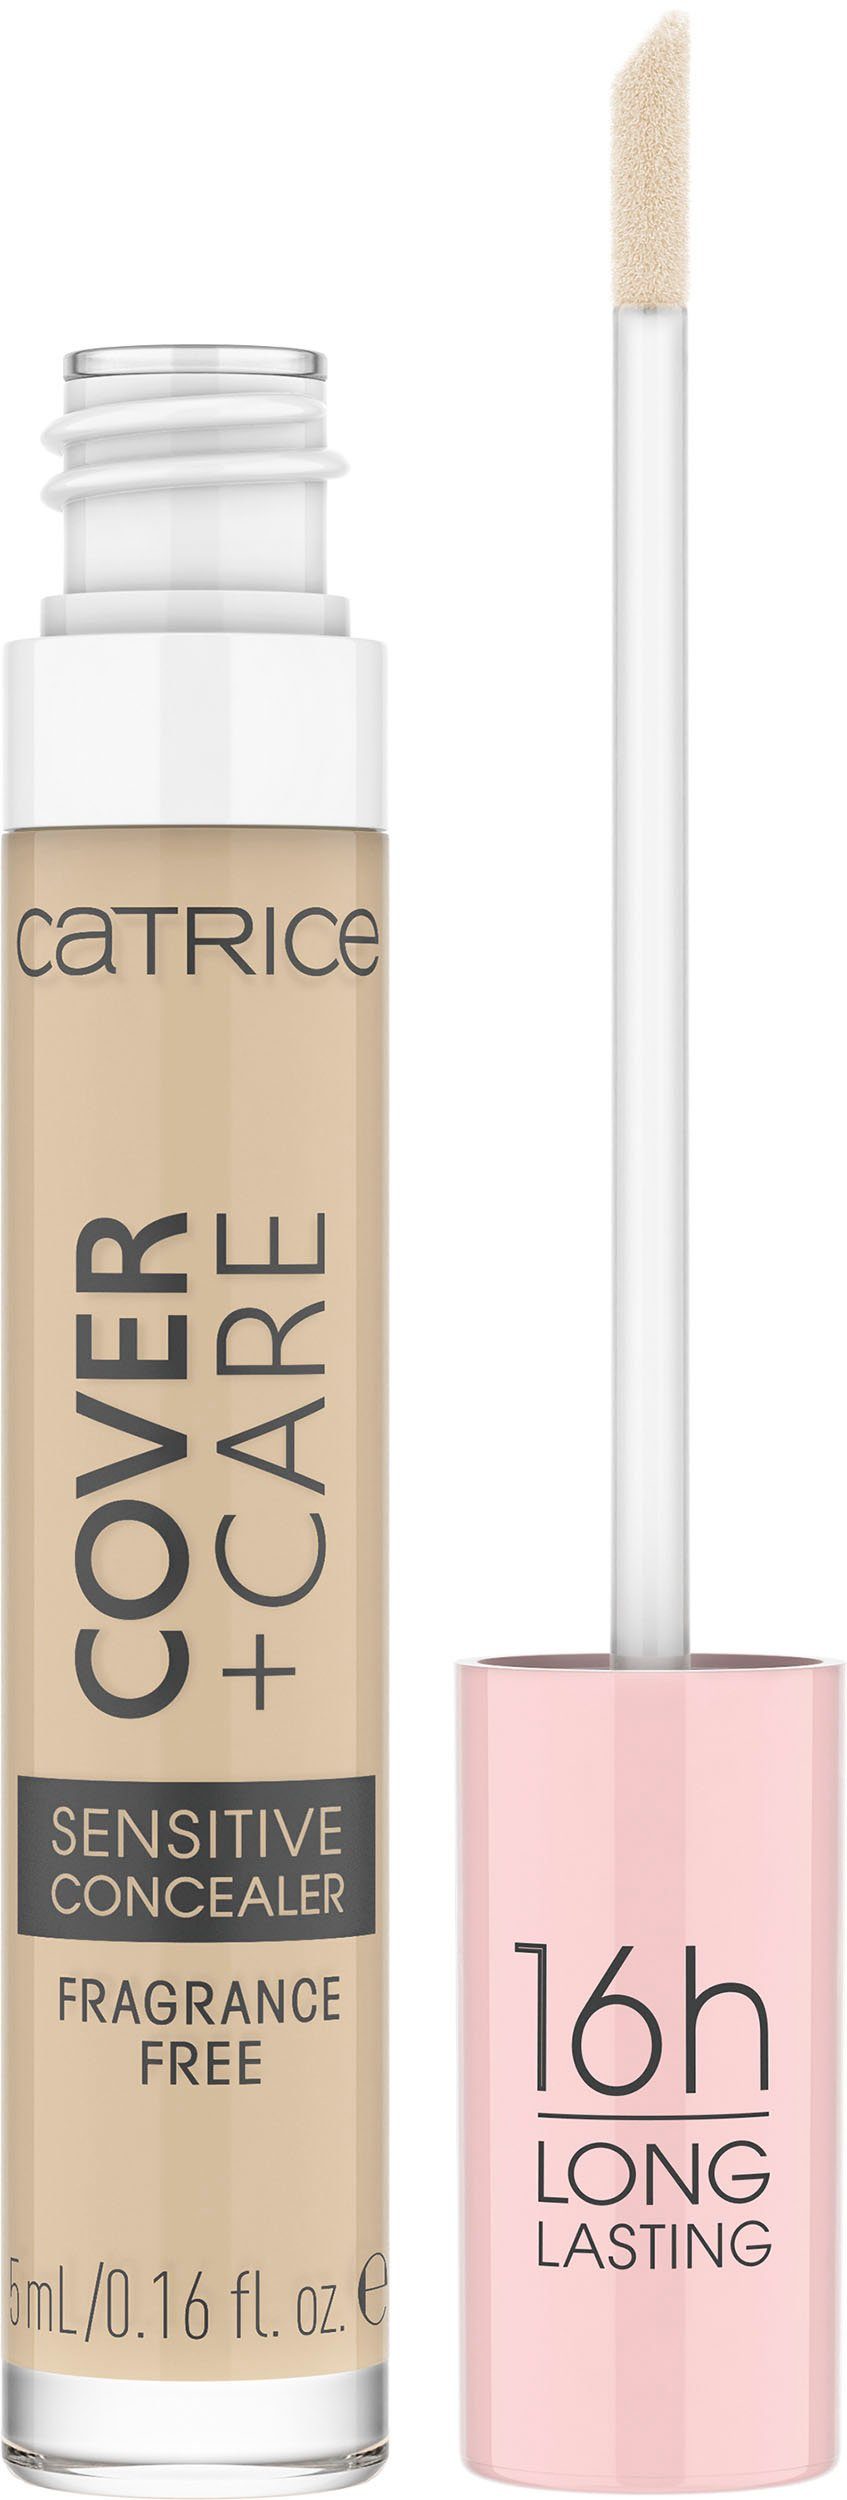 Catrice Concealer 3-tlg. 002N Catrice Care nude Cover Concealer, + Sensitive